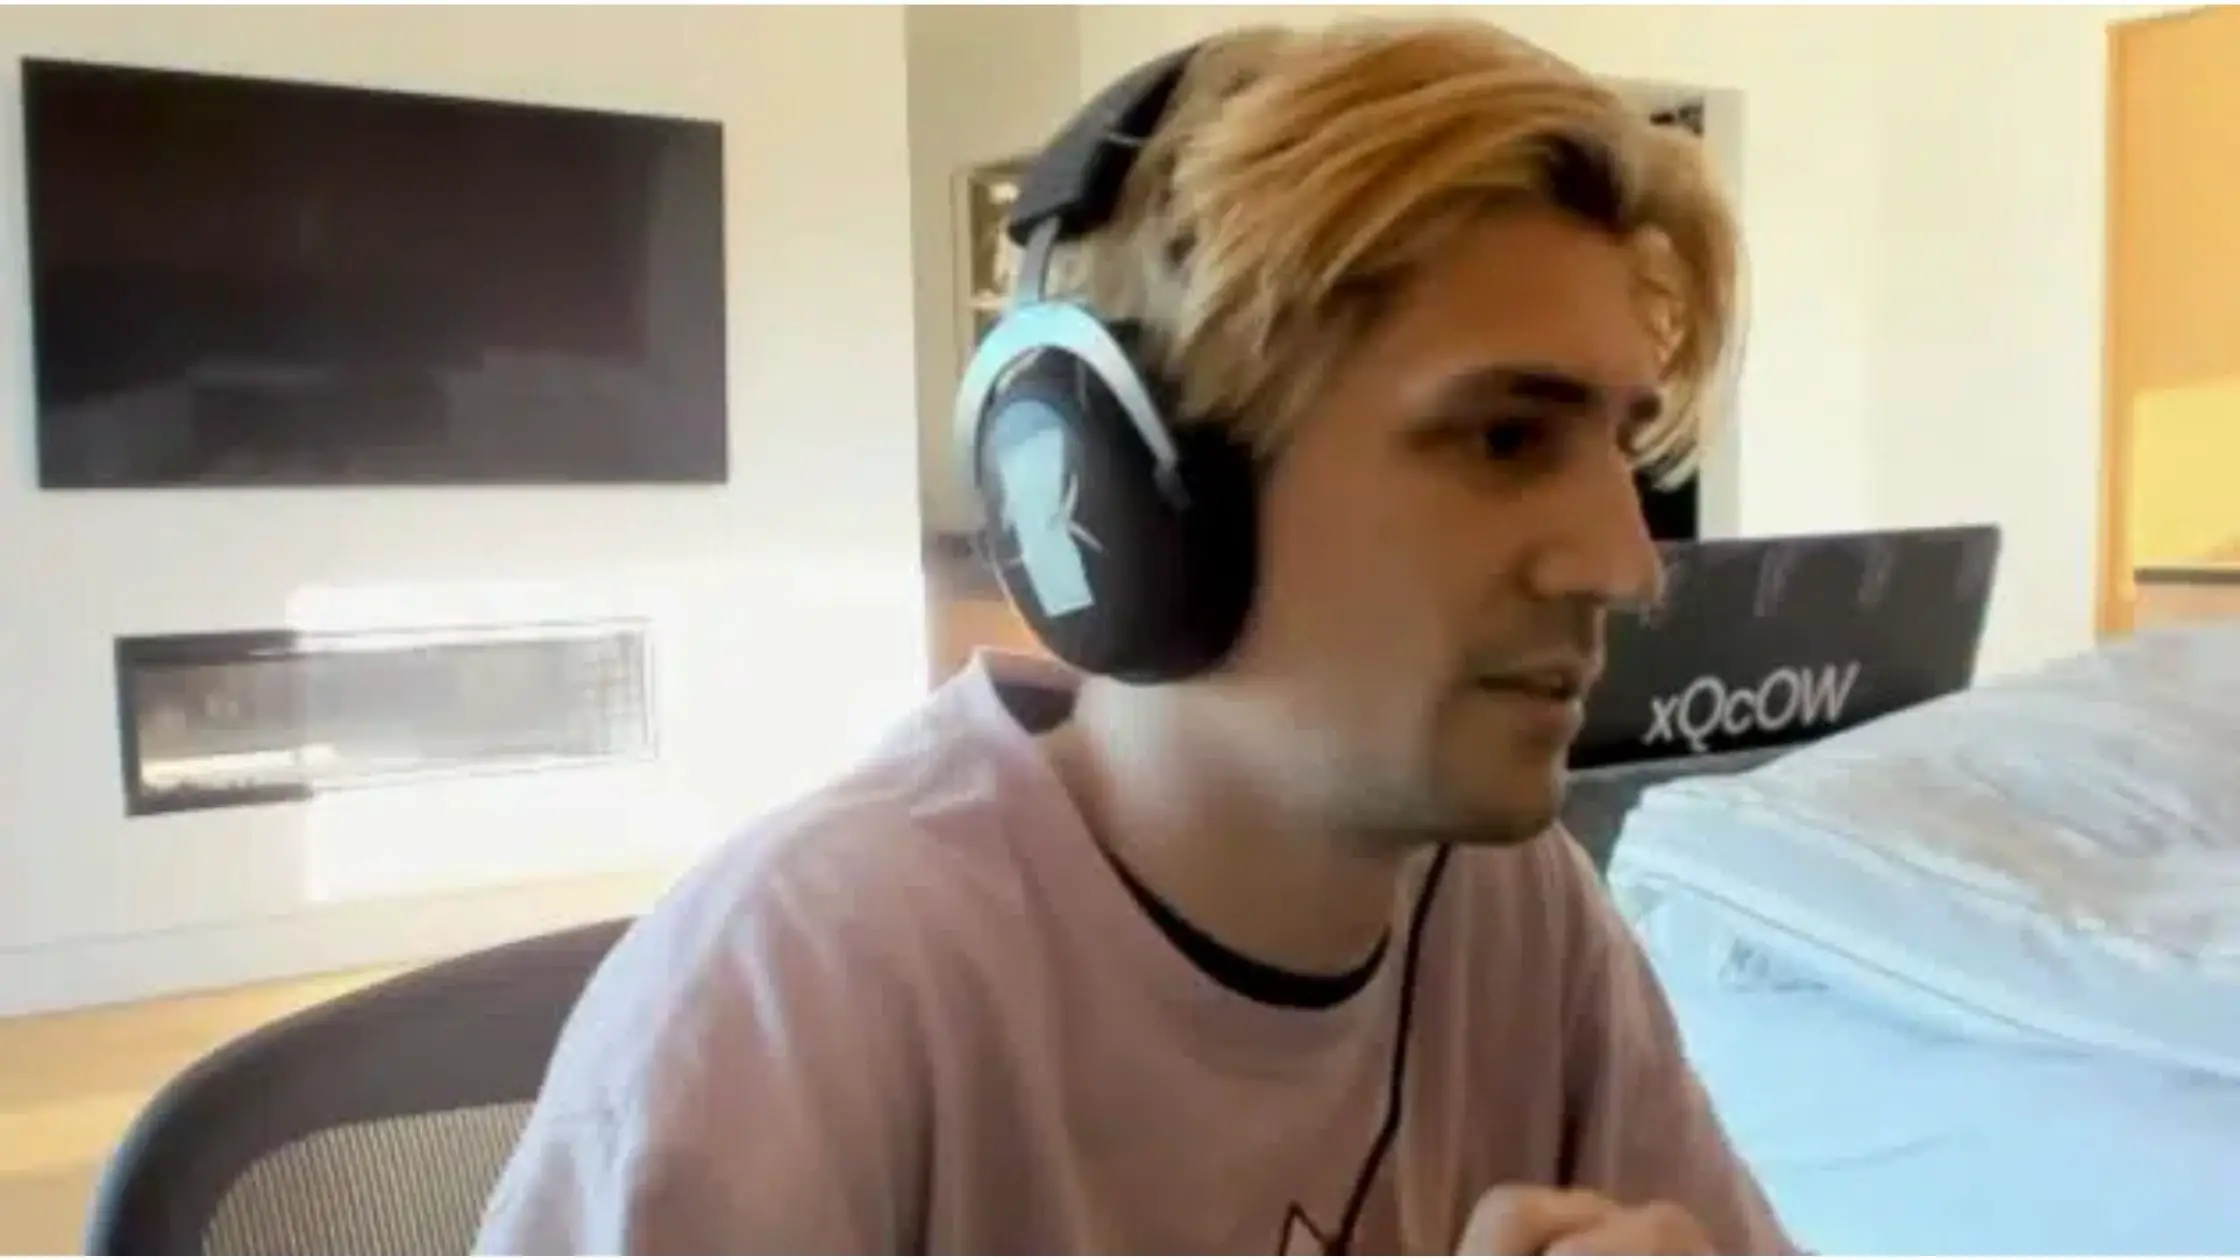 xQc-is-forced-to-relocate-again-after-multiple-technical-issues-in-la